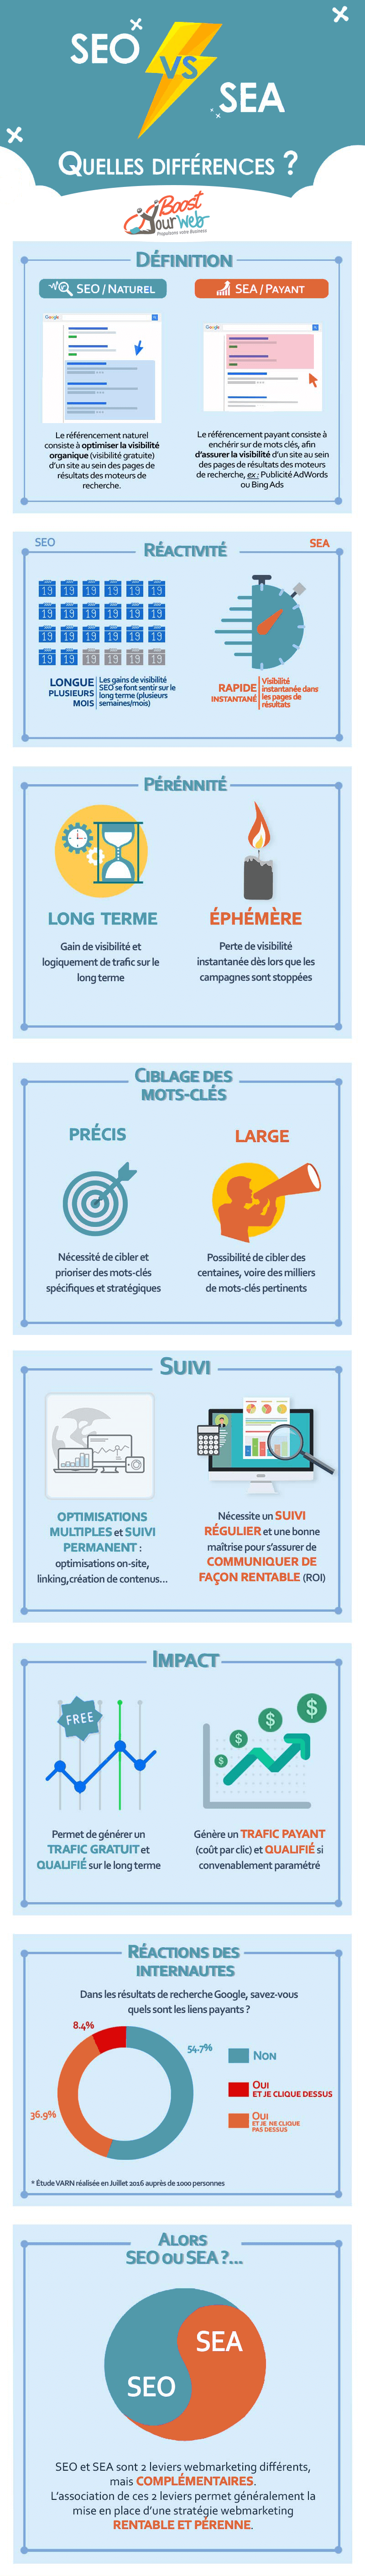 Infographie-difference-SEO-vs-SEA-new-VERSION